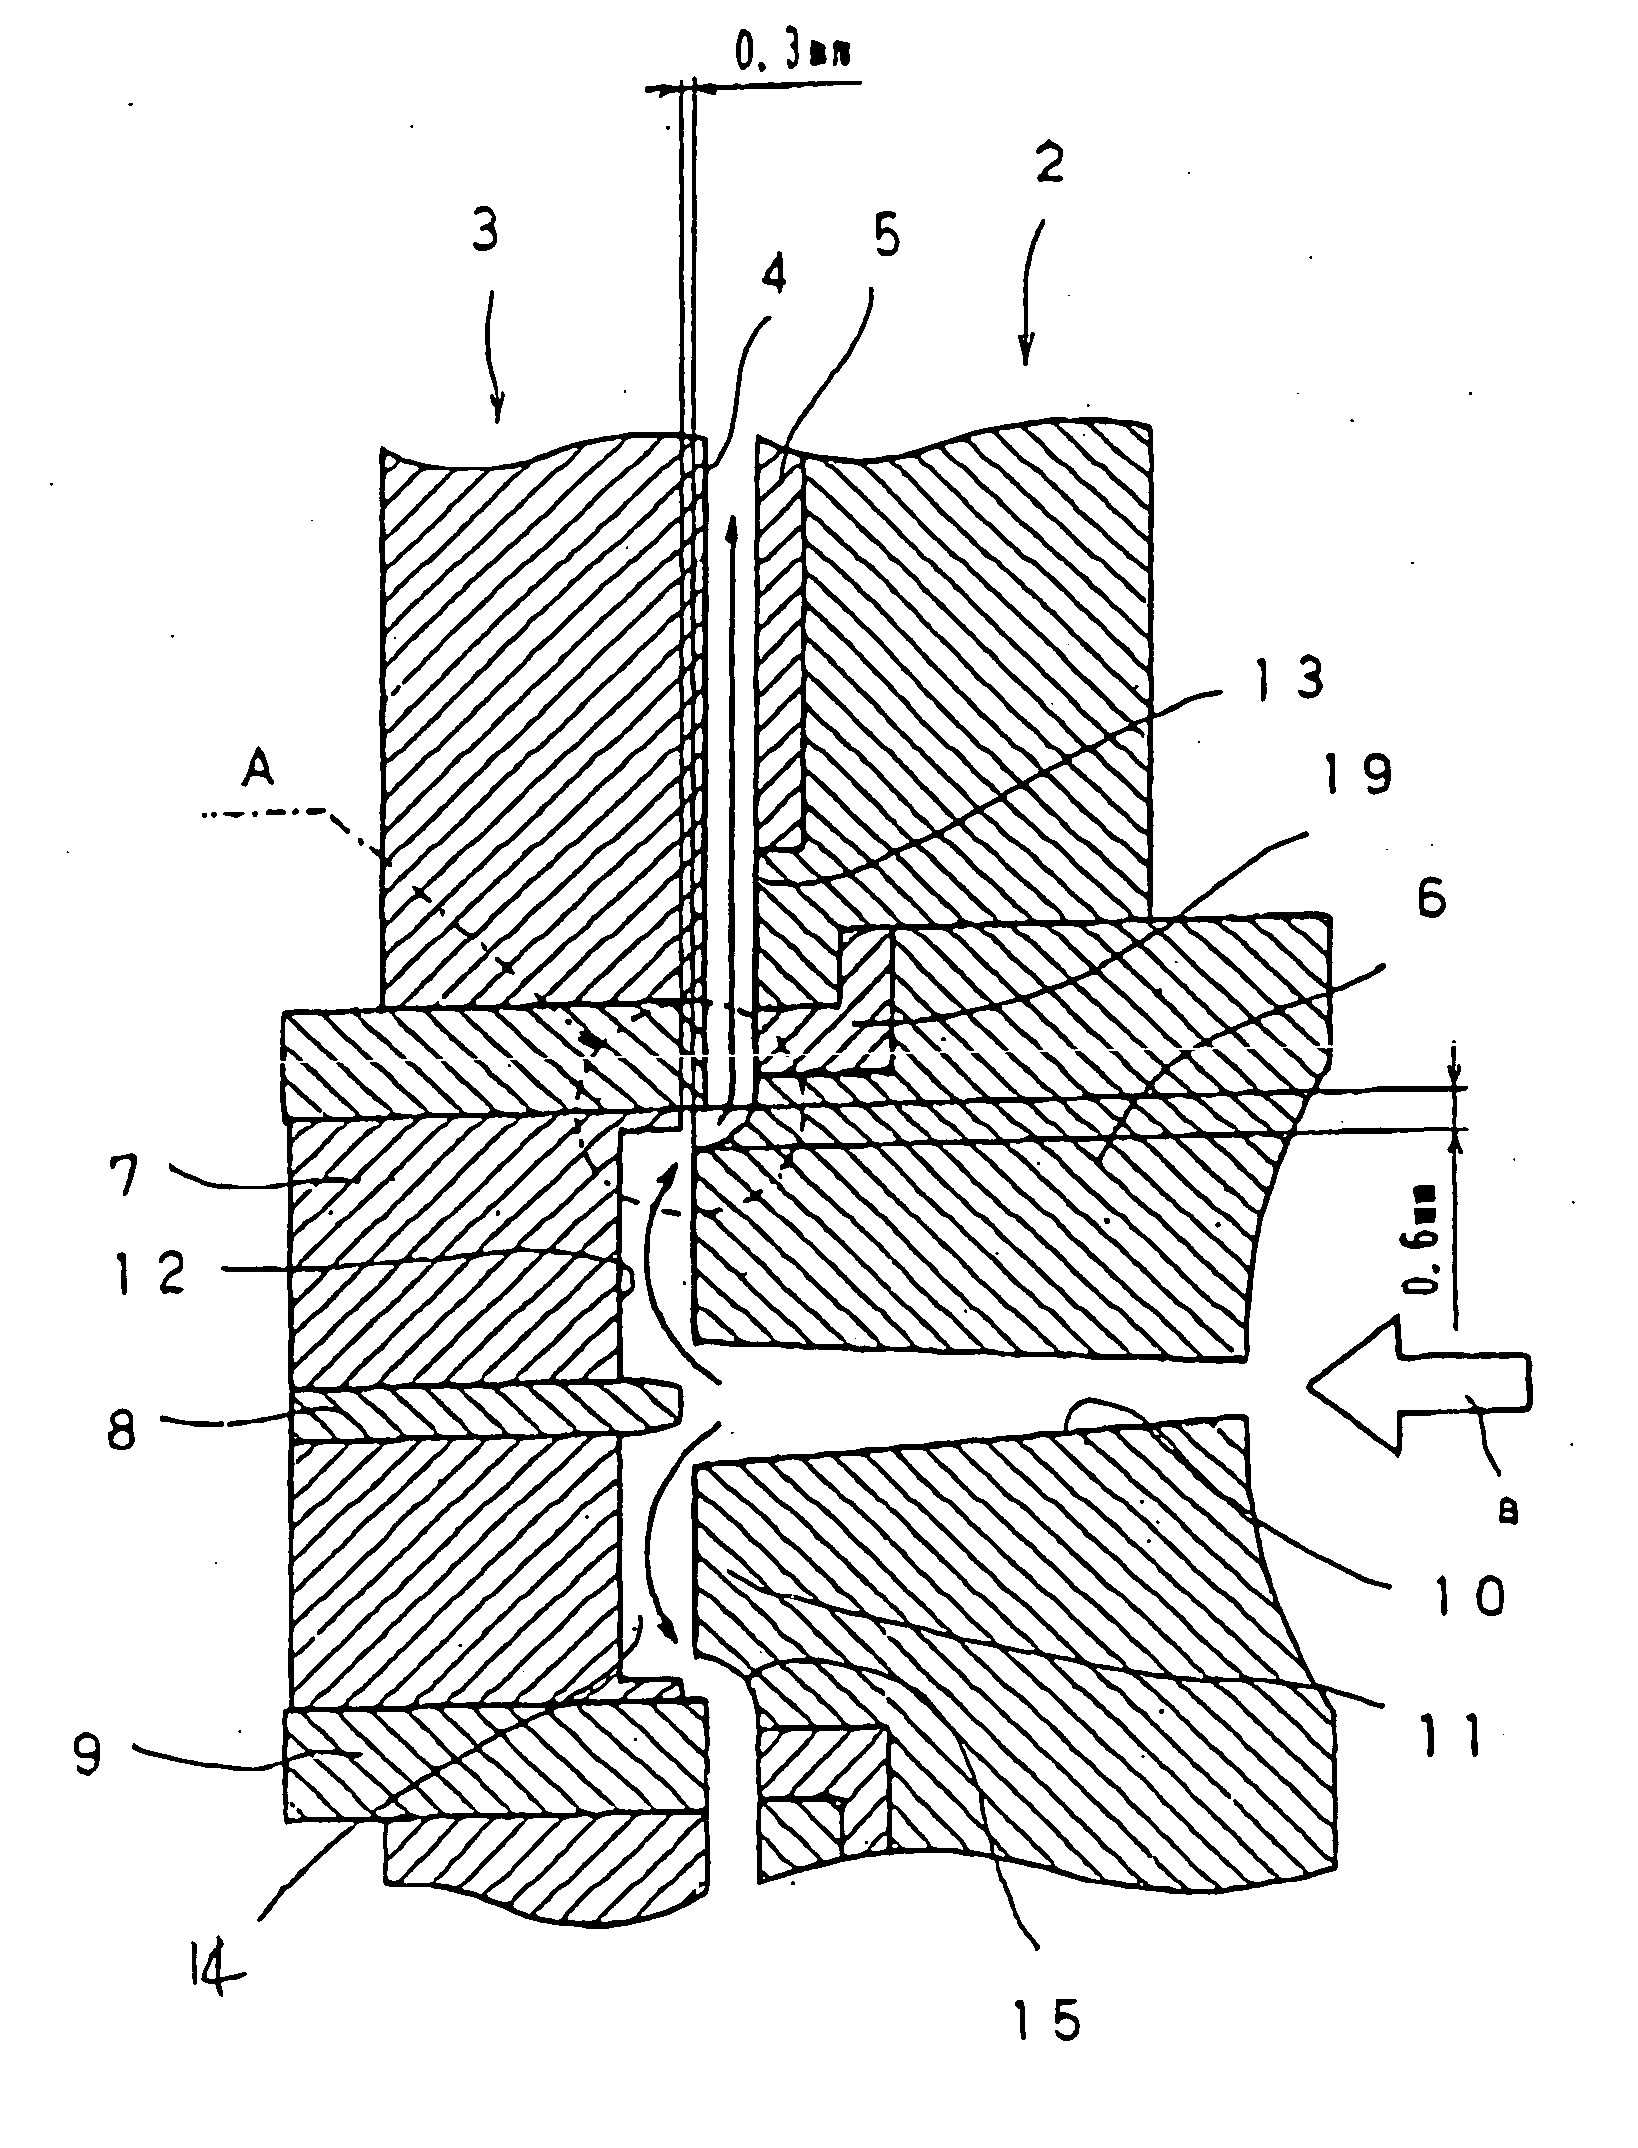 Disk substrate, mold apparatus for injection molding the same, and disk substrate taking-out robot